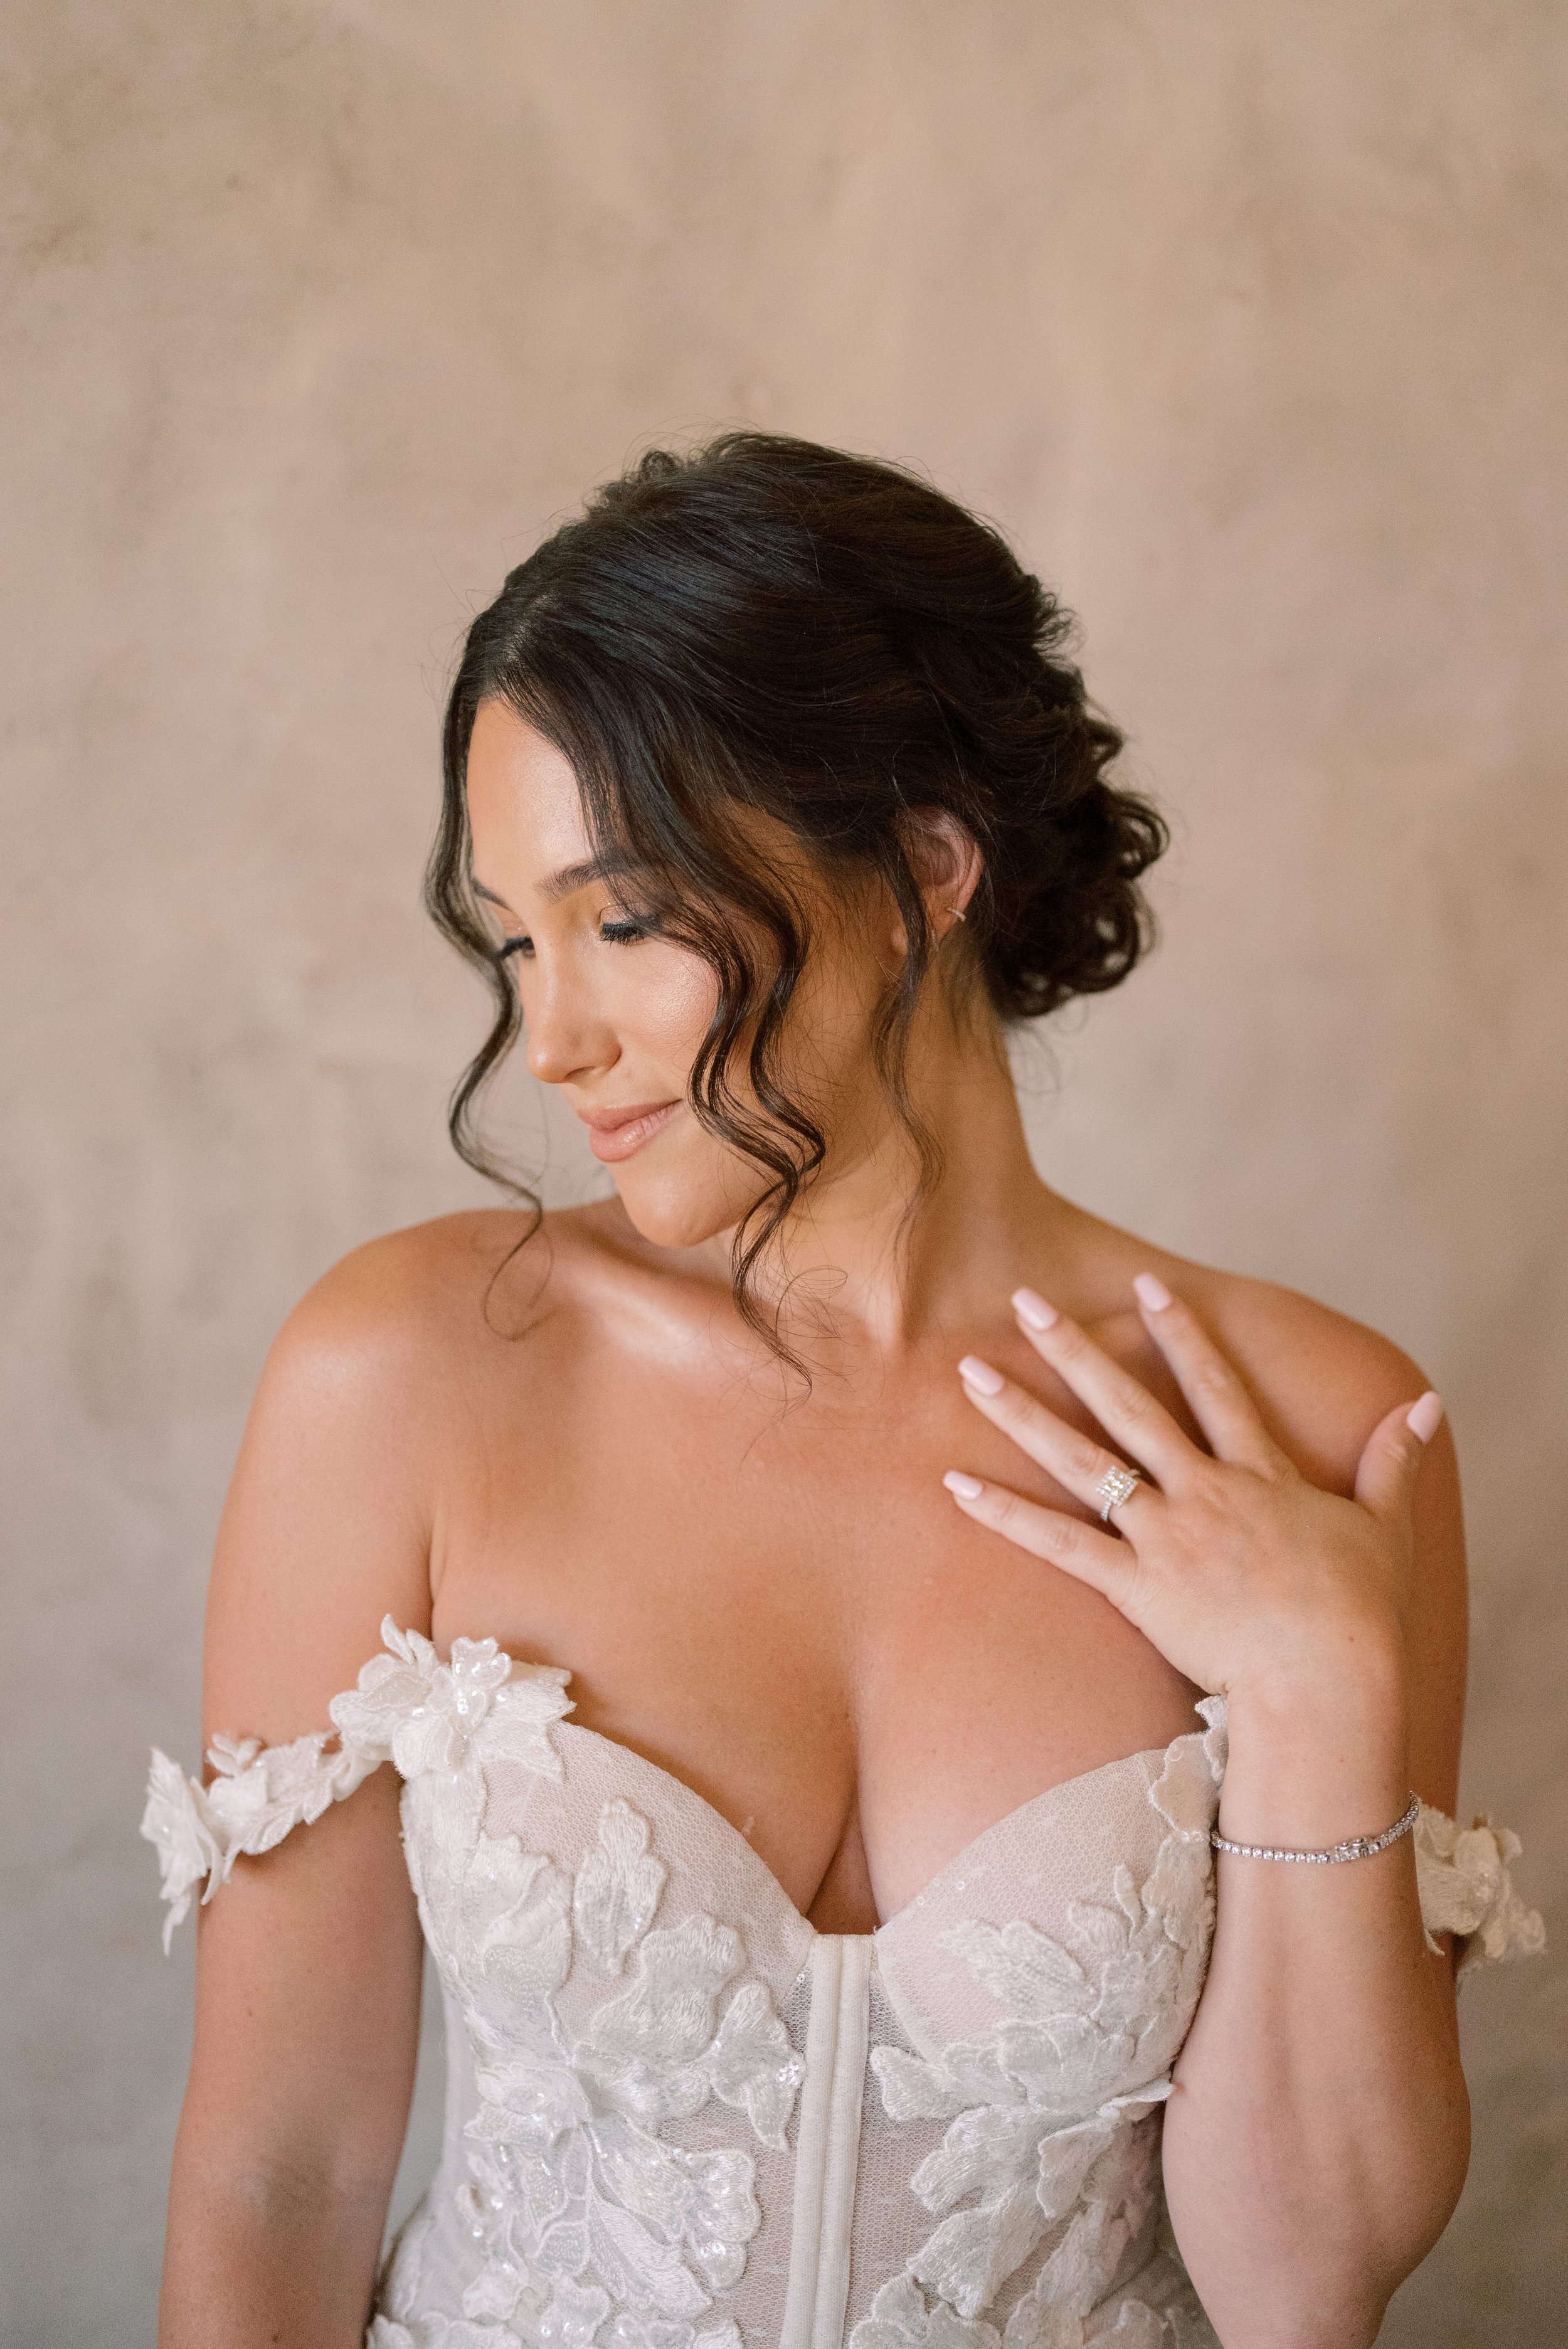 Done by Domonique Baez. SoCal Wedding Hairstylist for Luxurious, Effortless and Modern Brides.